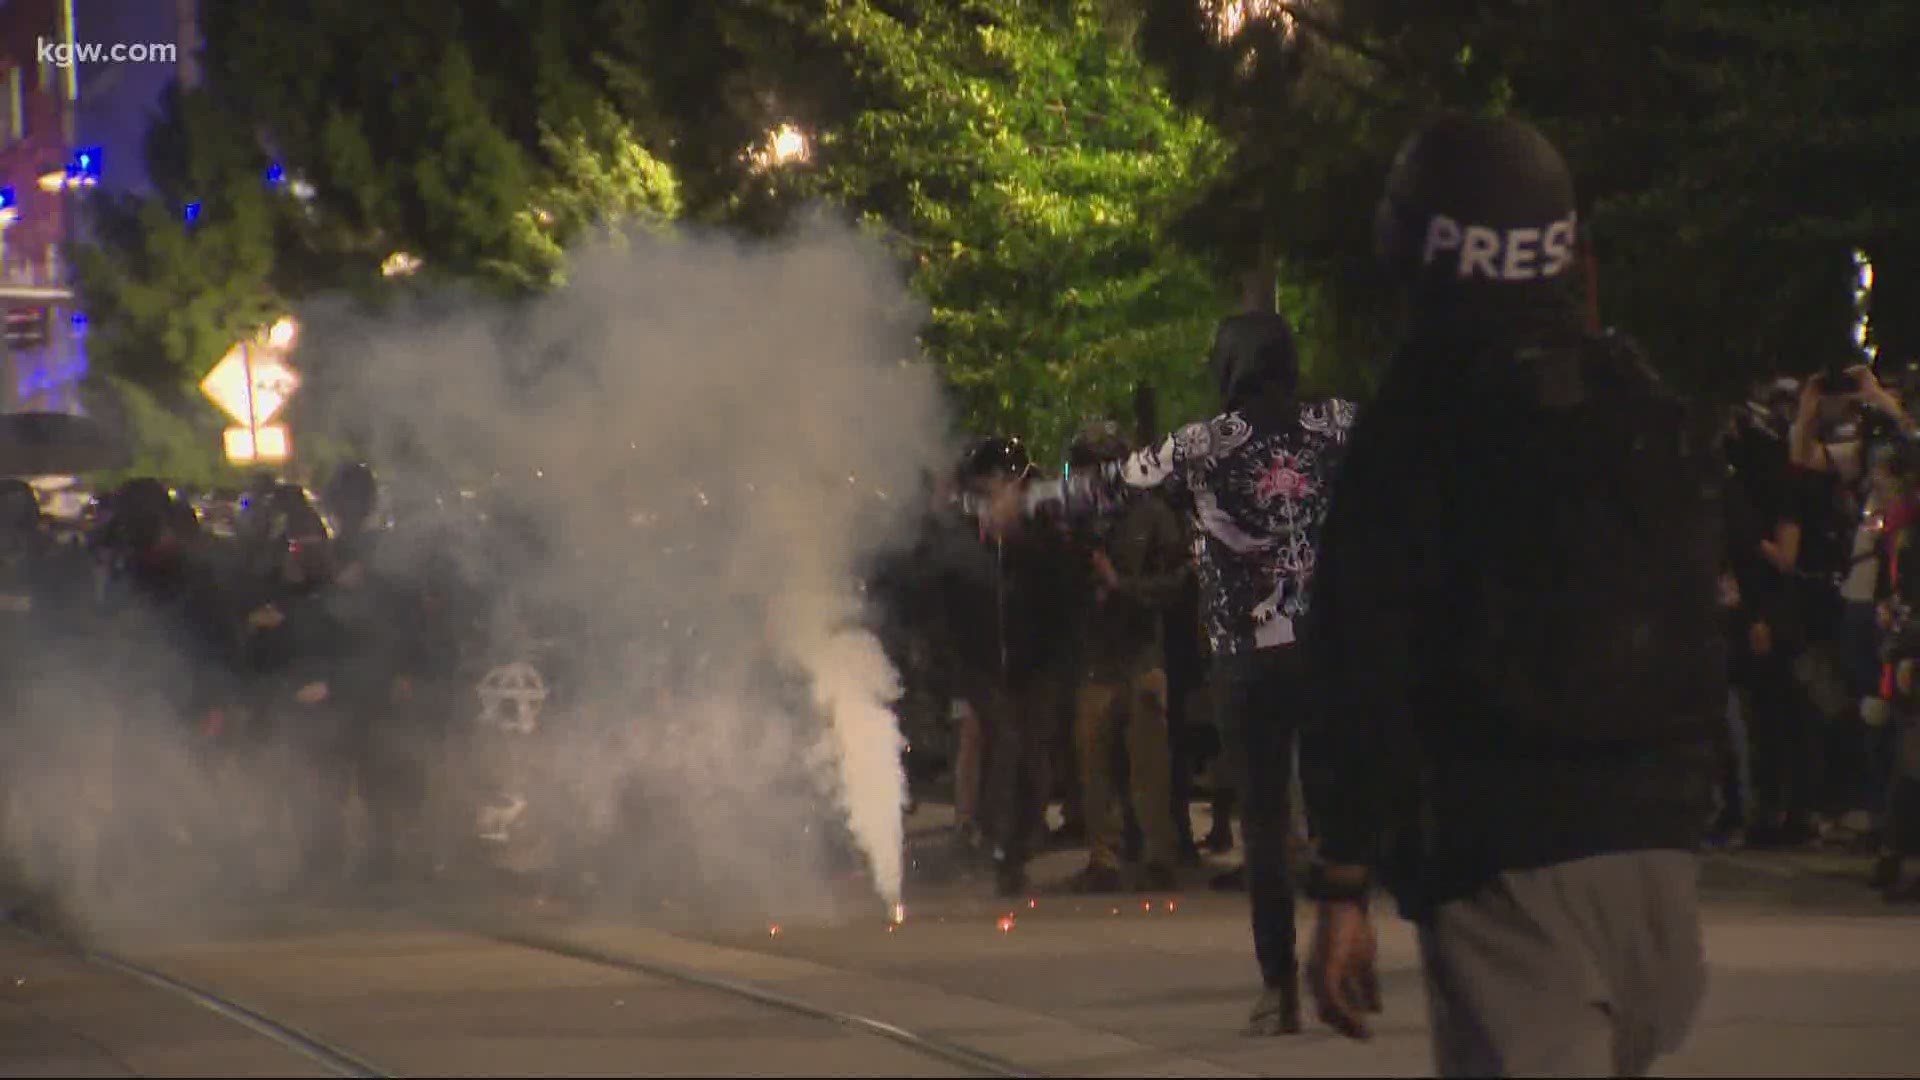 Police say demonstrators threw rocks and glass bottles at officers. Officers fired tear gas and other munitions at the crowd, according to police.